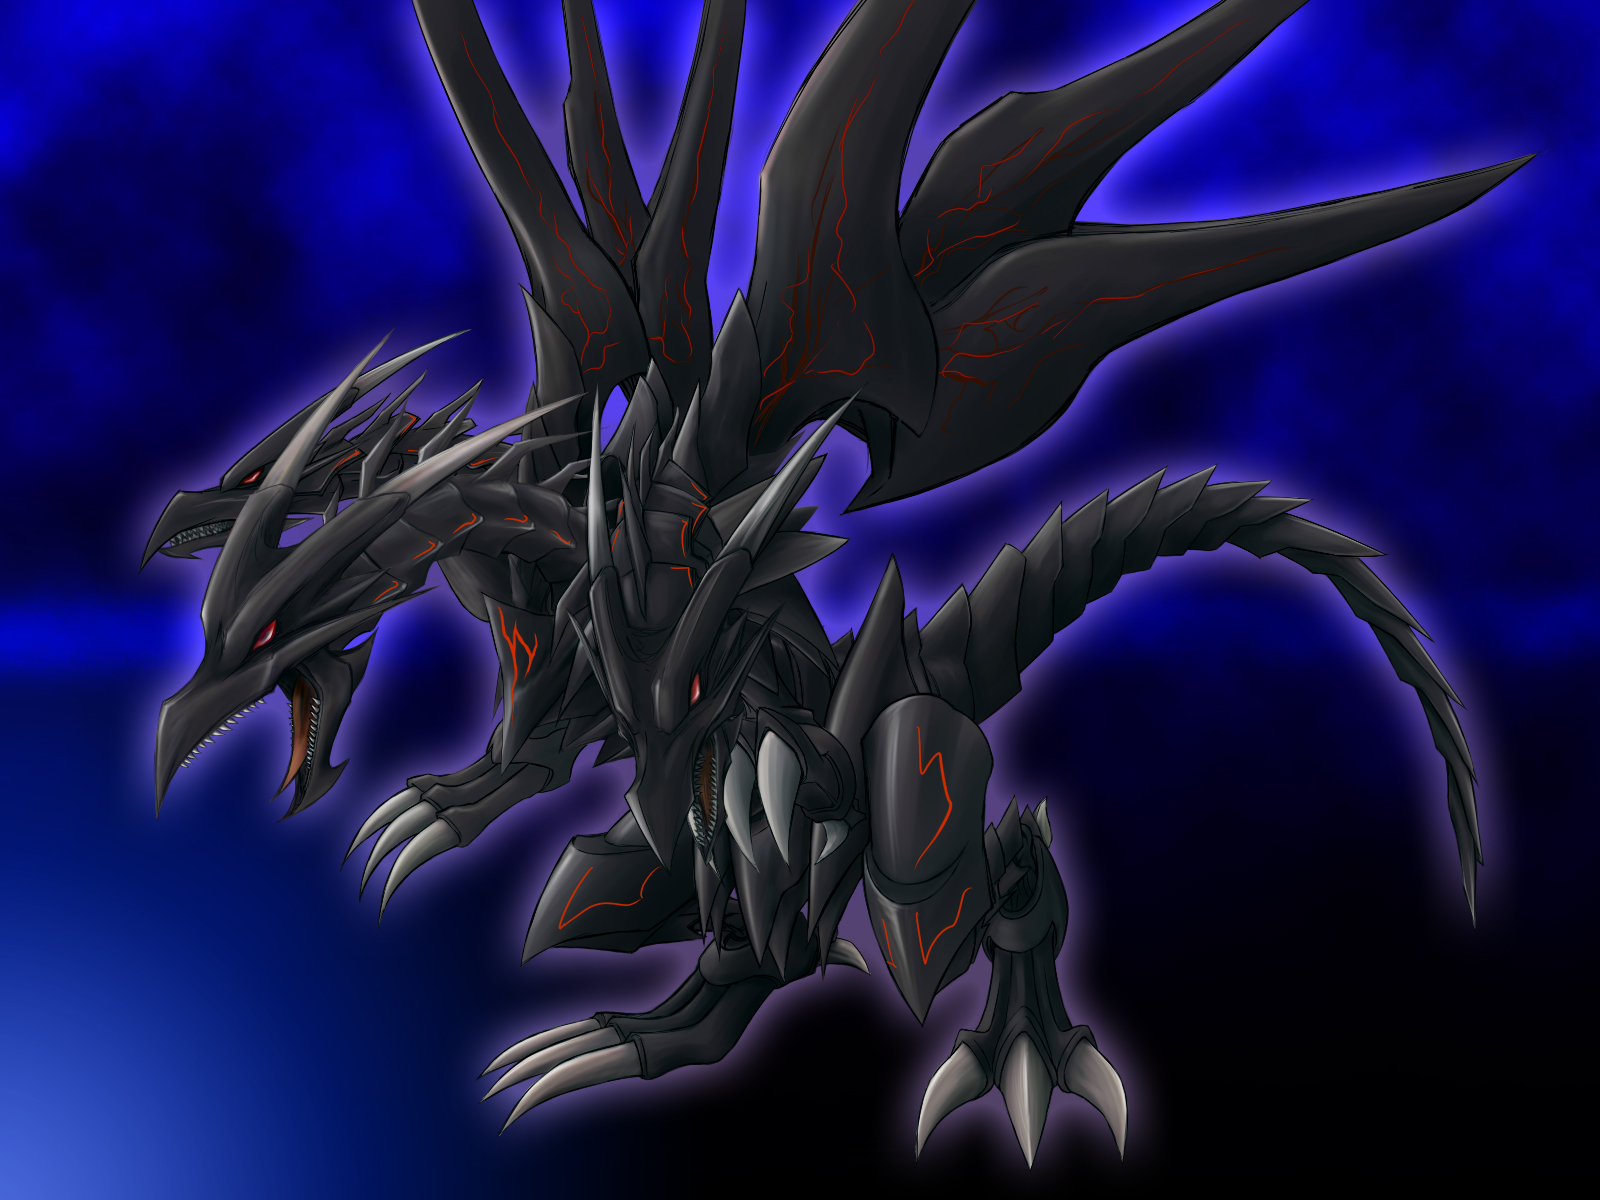 Red Eyes Ultimate Dragon Wallpaper Image Amp Pictures Becuo